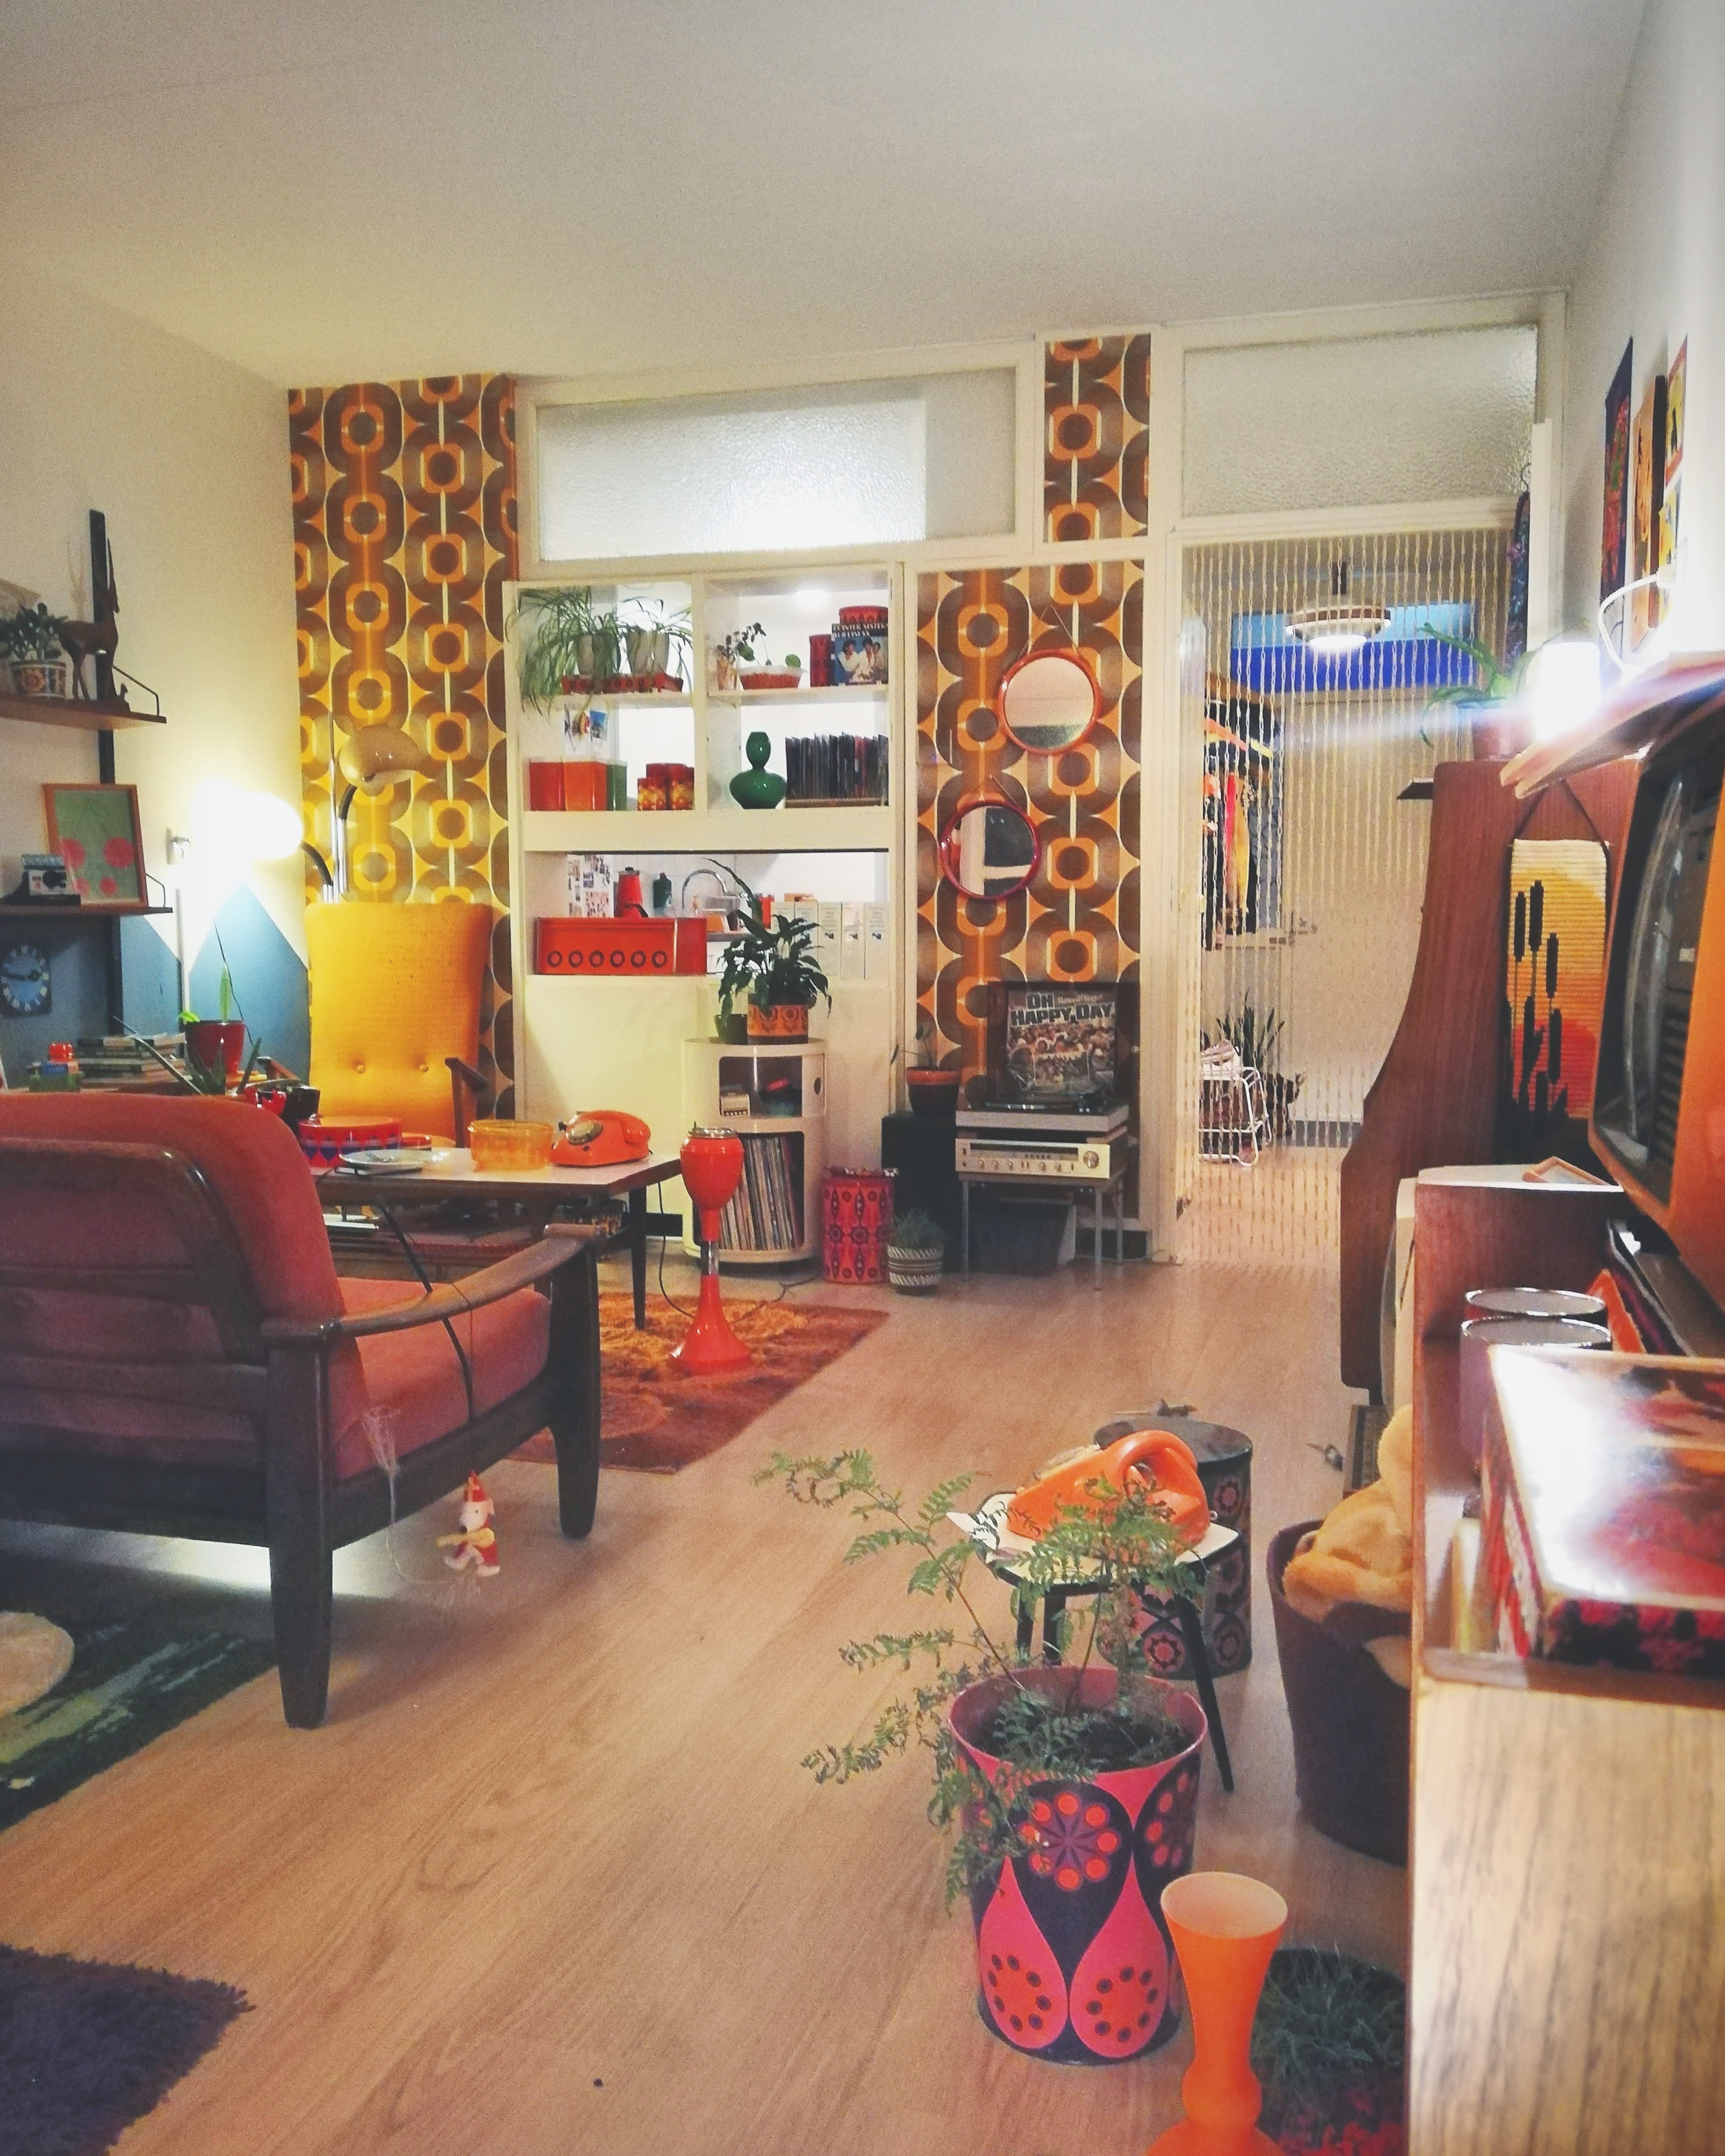 A Home Decorated Only In Sixties and Seventies Decor | Apartment ...